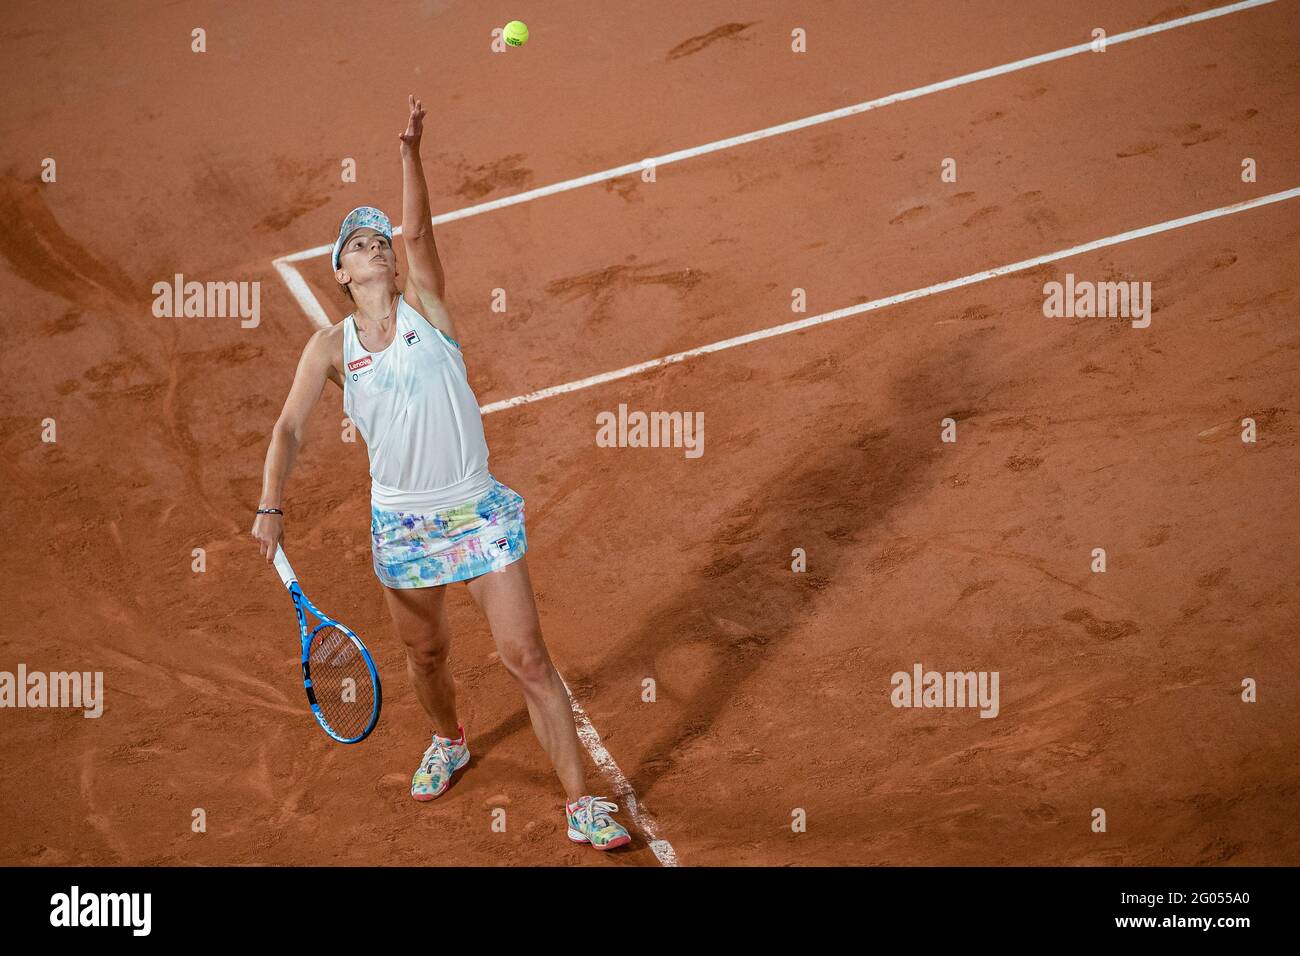 Paris, France. 31st May, 2021. Irina-Camelia Begu of Romania serves the ball during the women's first round match against Serena Williams of the United States at the French Open tennis tournament at Roland Garros in Paris, France, May 31, 2021. Credit: Aurelien Morissard/Xinhua/Alamy Live News Stock Photo